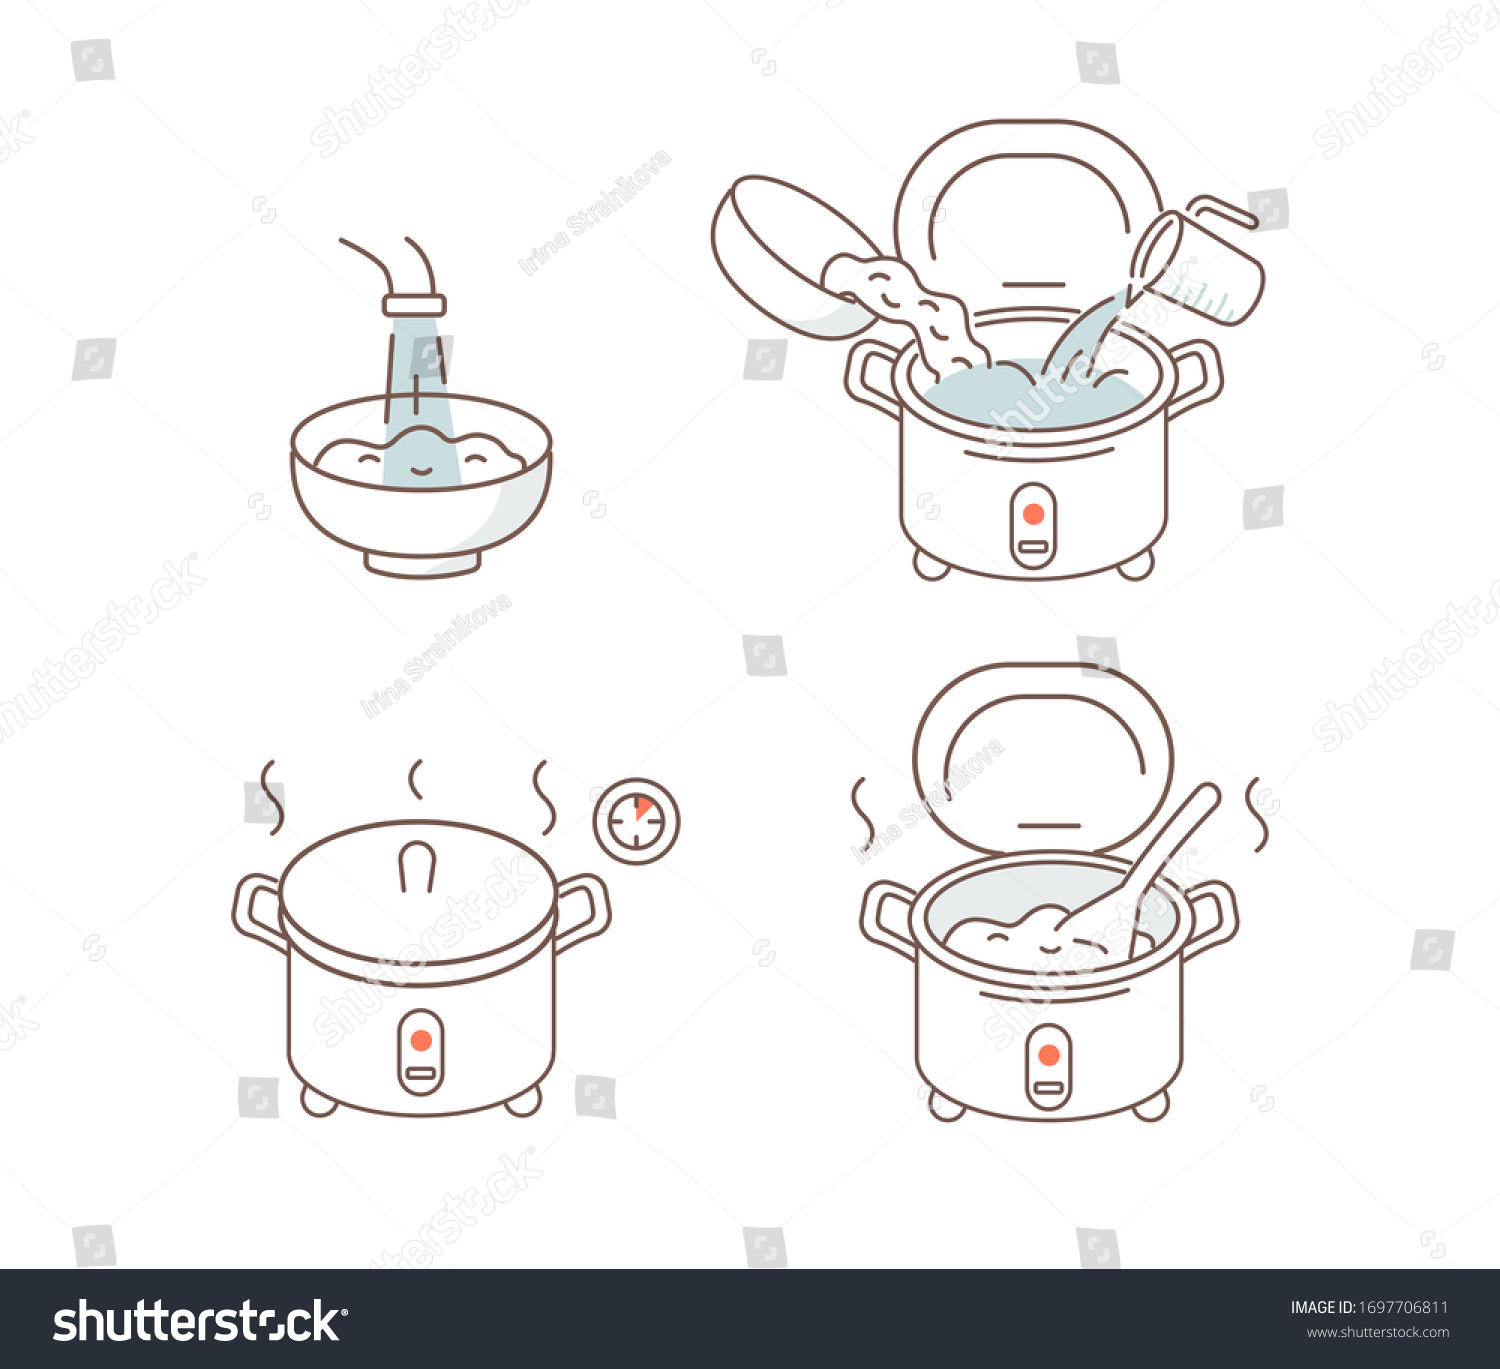 495 Sticky rice cooker Images, Stock Photos & Vectors | Shutterstock